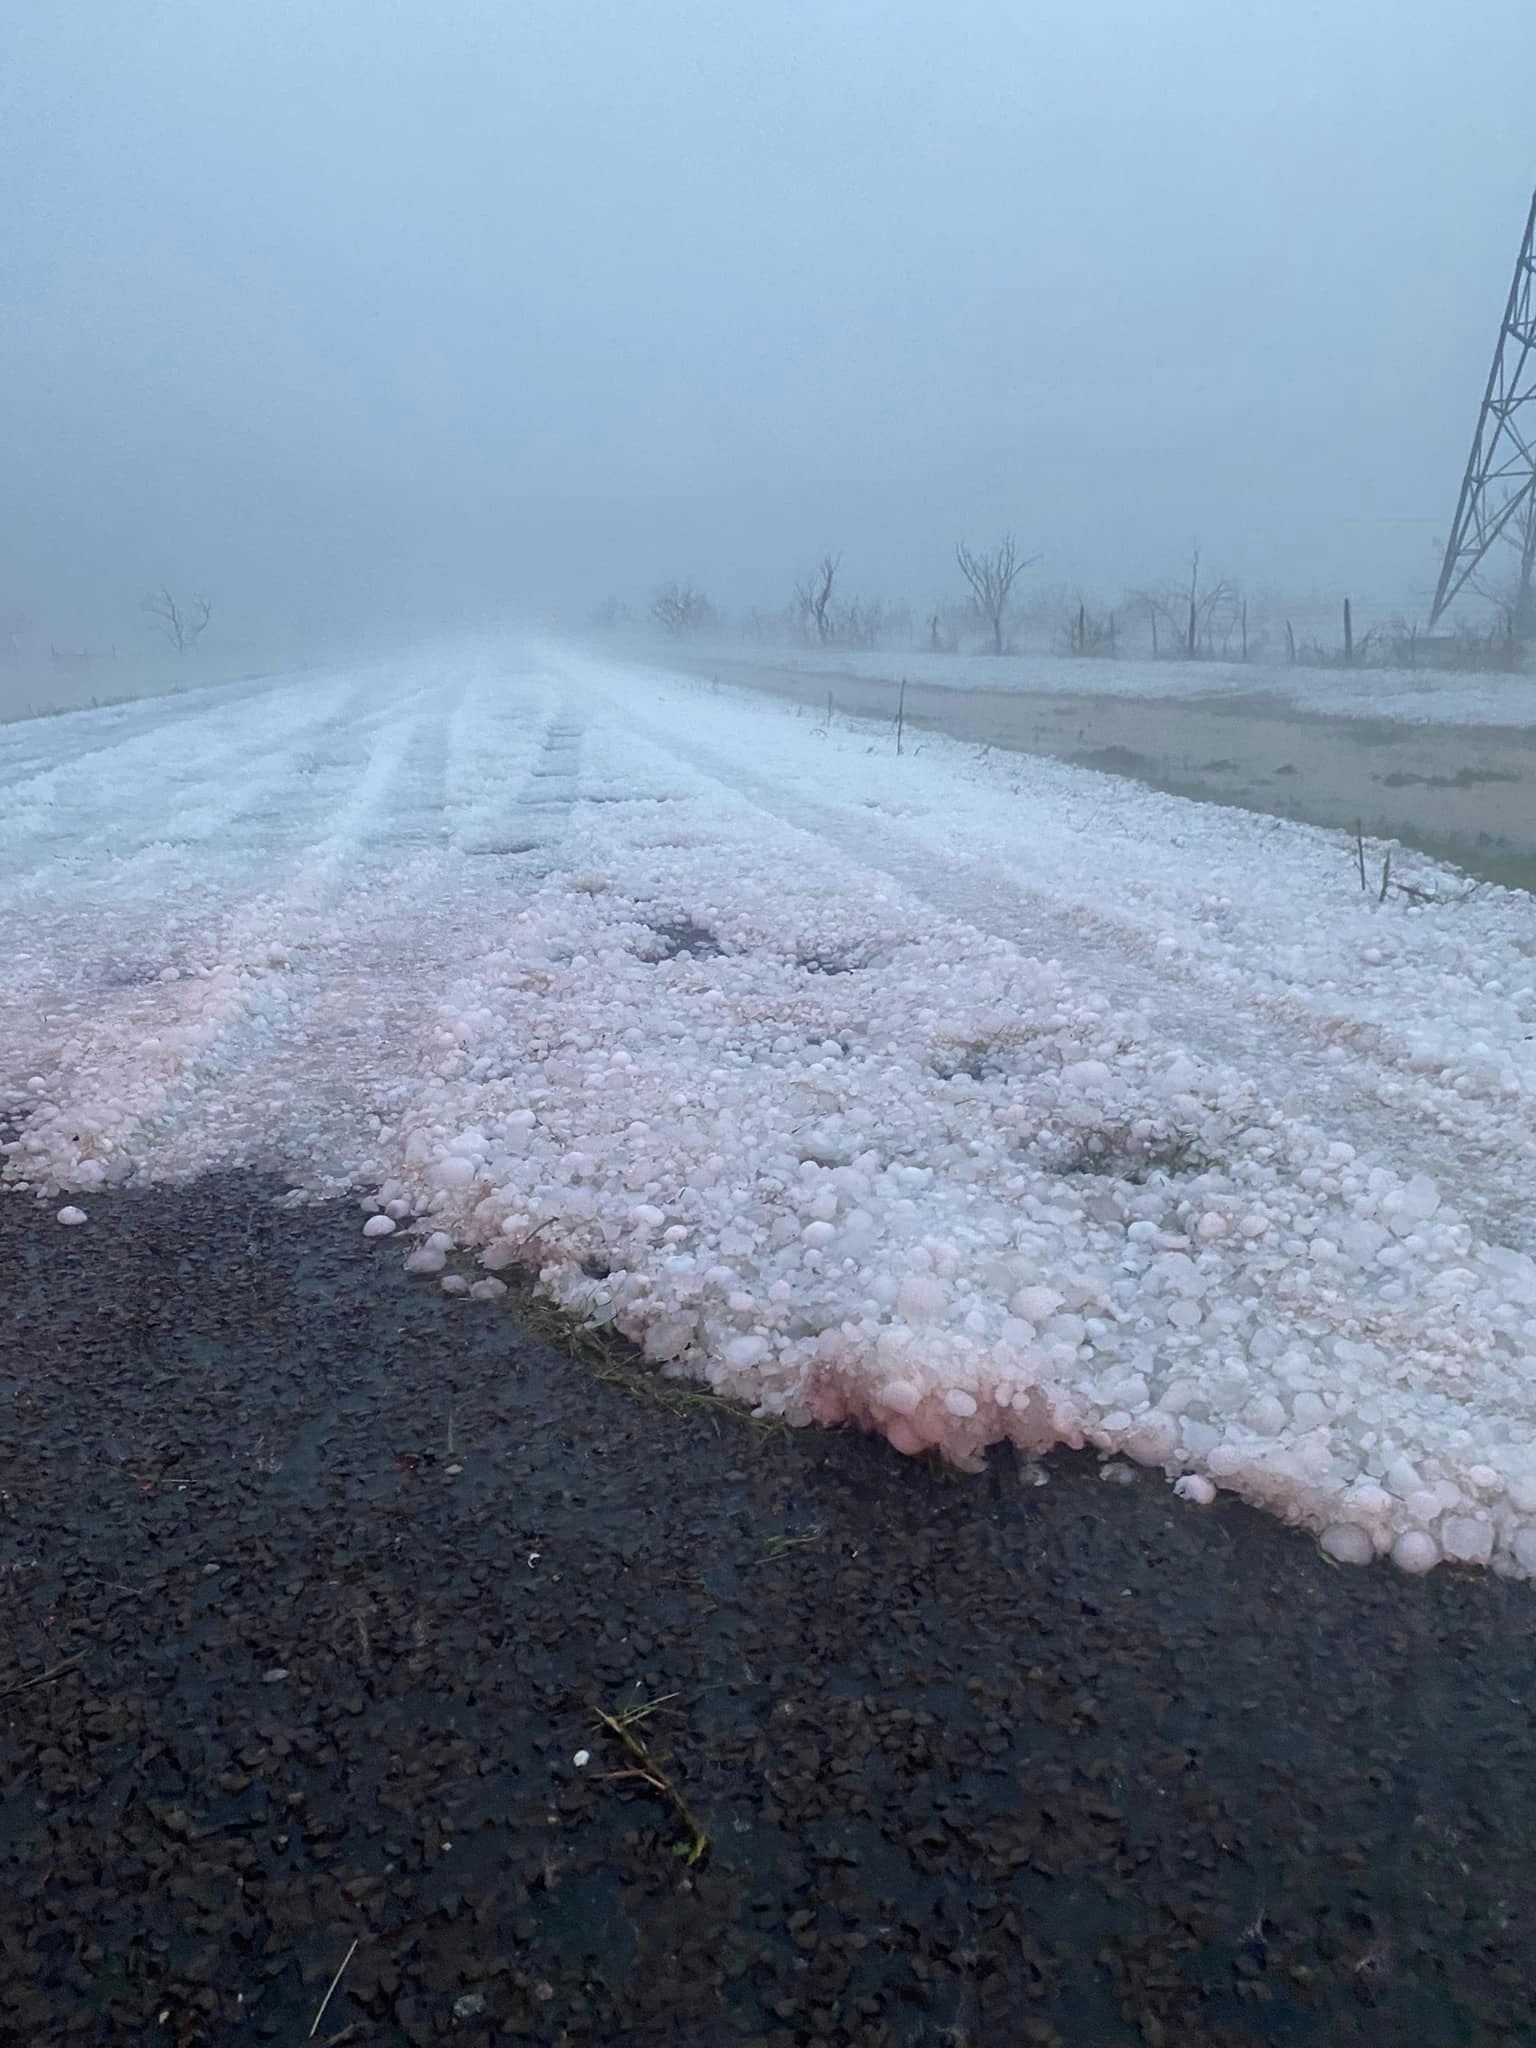 Three FEET — not inches — of hail reported in Texas storm. Has it ever happened in Indiana?